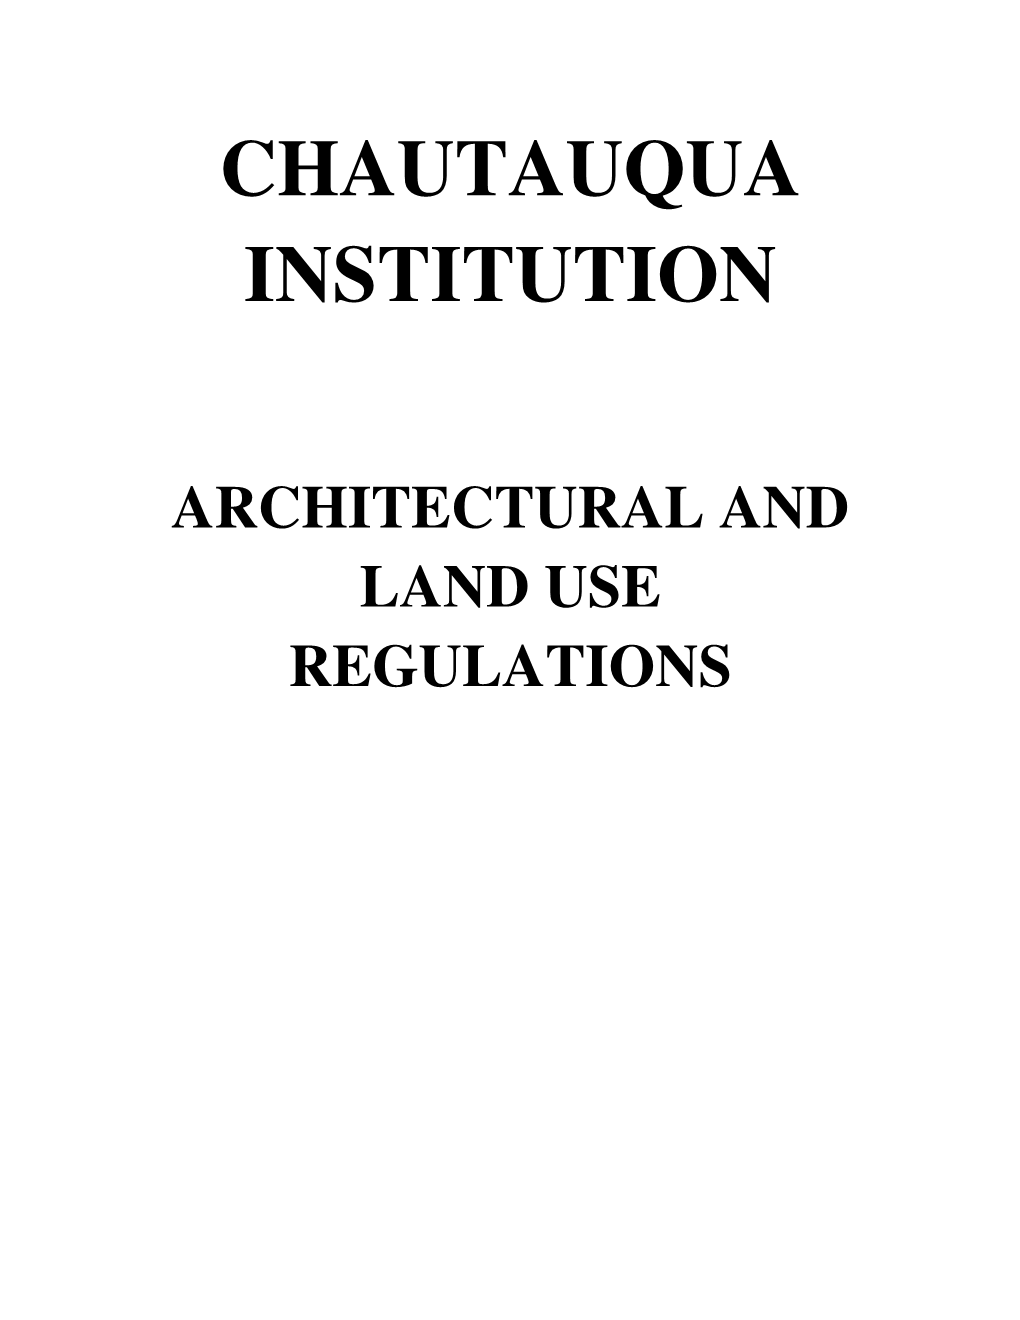 Architectural & Land Use Regulations